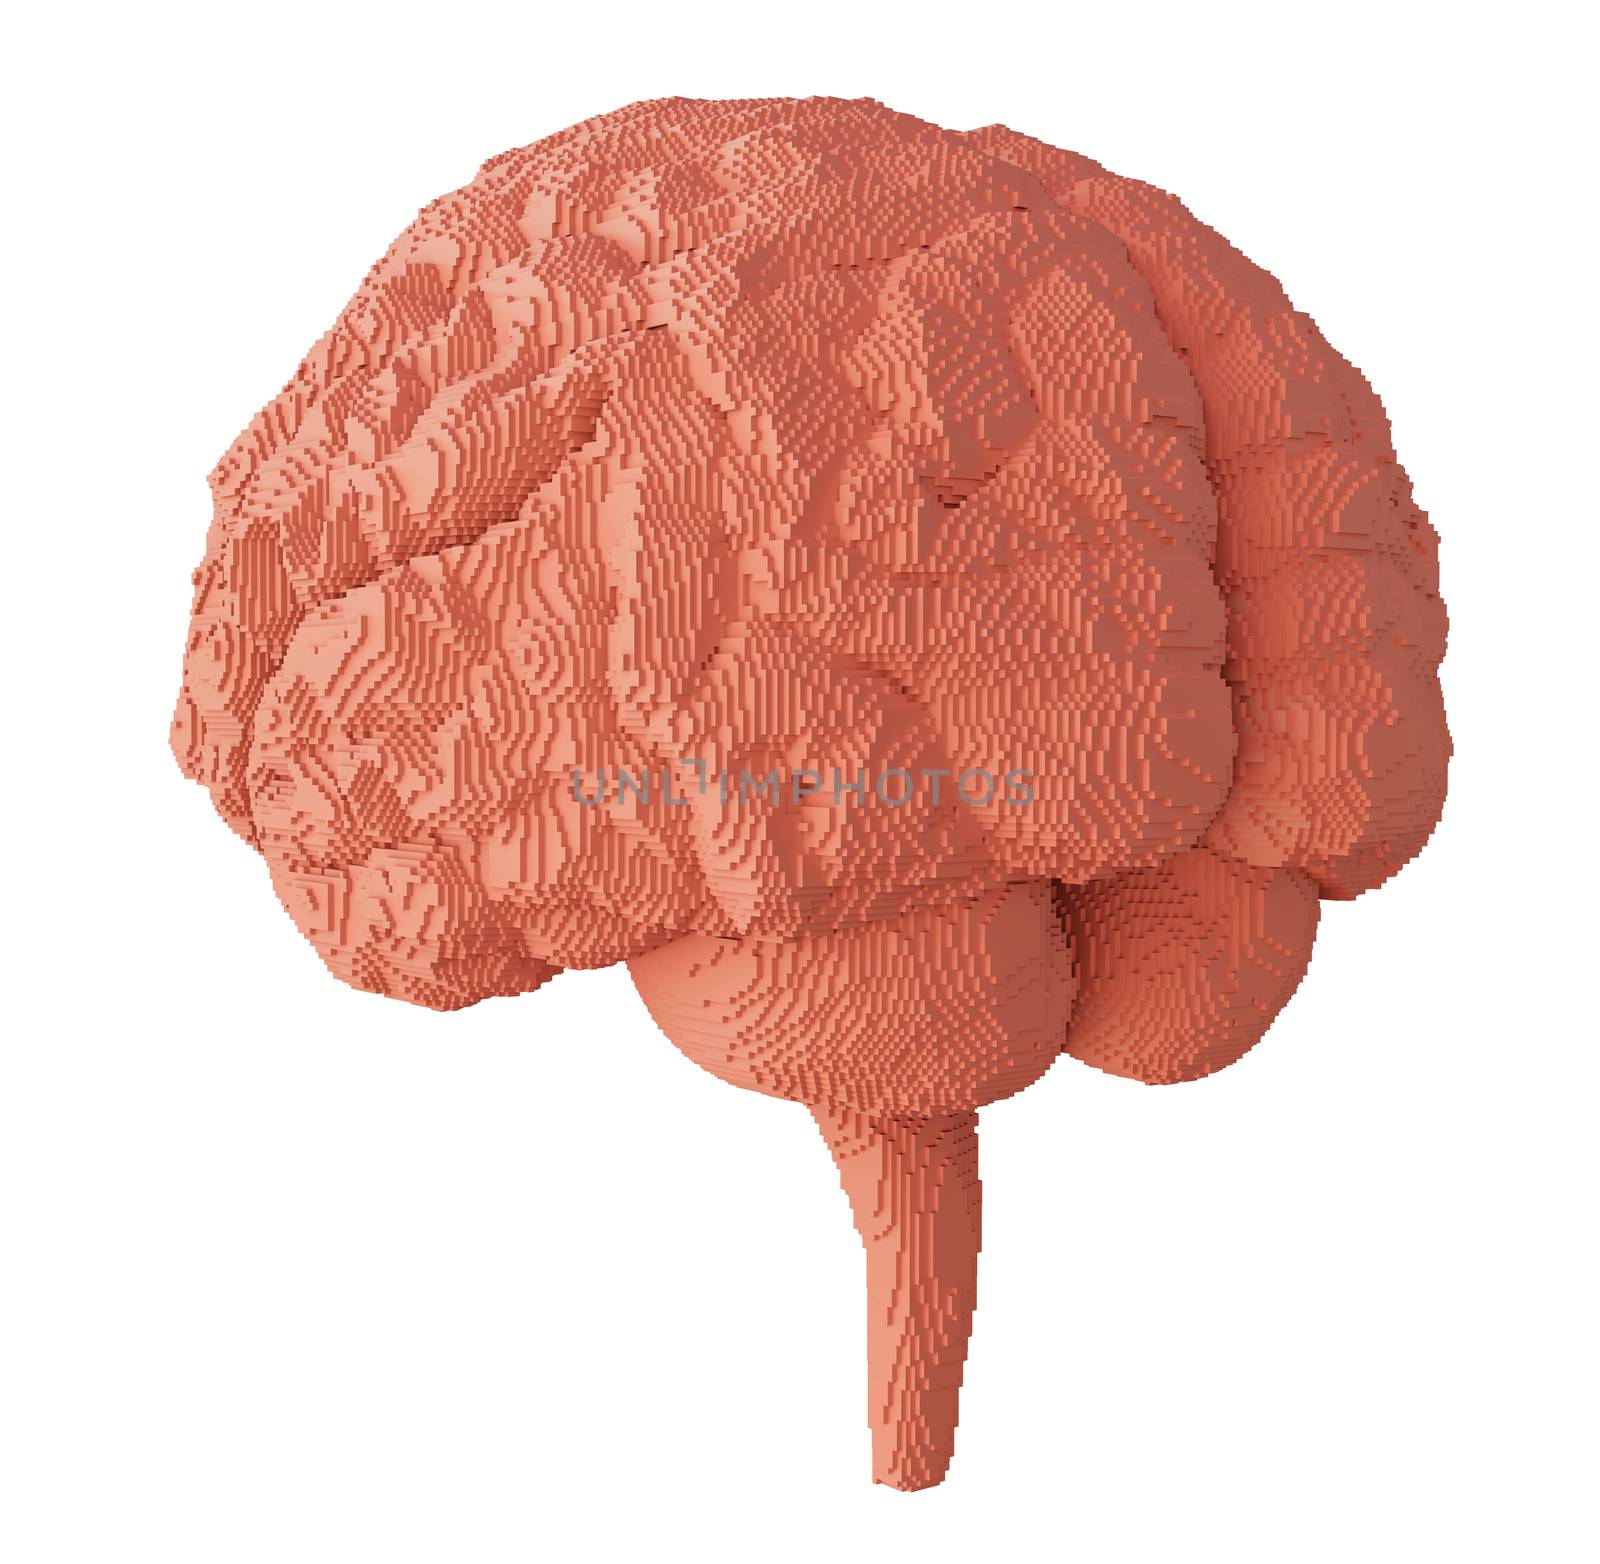 3d rendered brain isolated by cherezoff